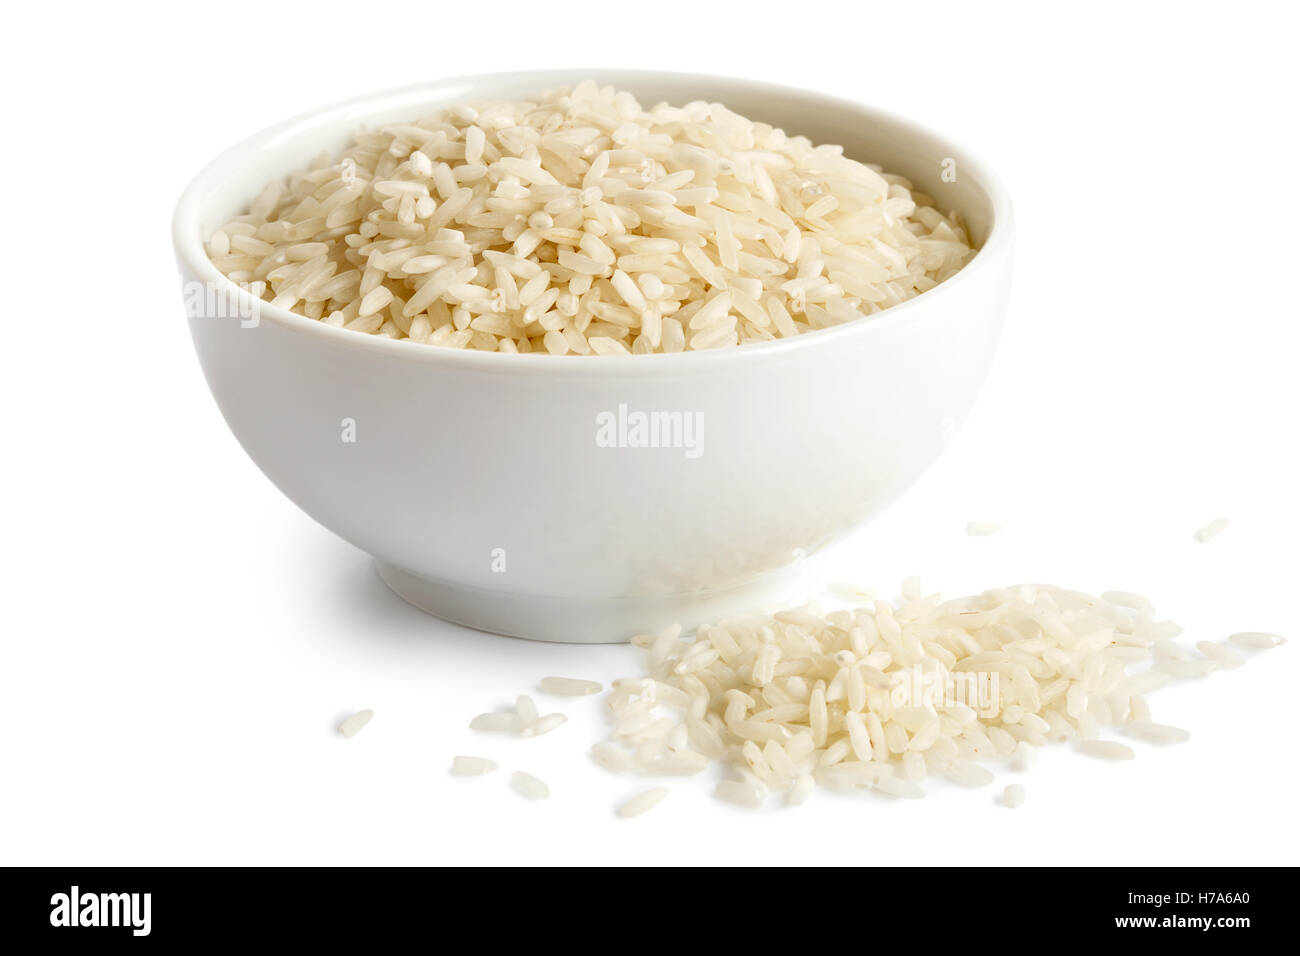 Bowl of long grain white rice isolated on white. Spilled rice. Stock Photo